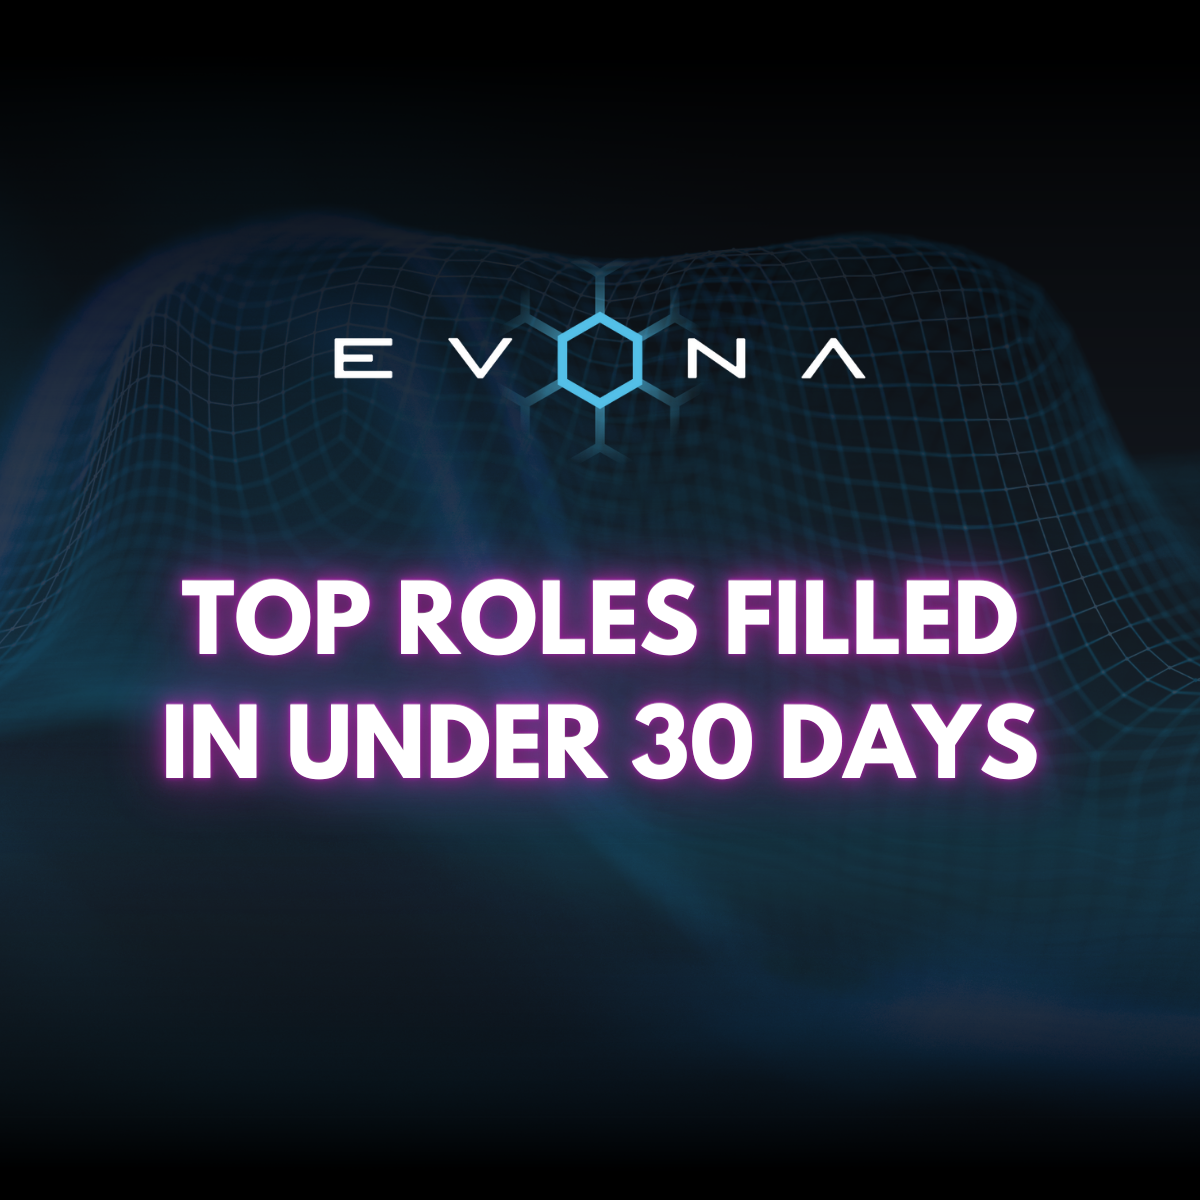 Top 28 Roles Filled Under 30 Days by Evona in 2023